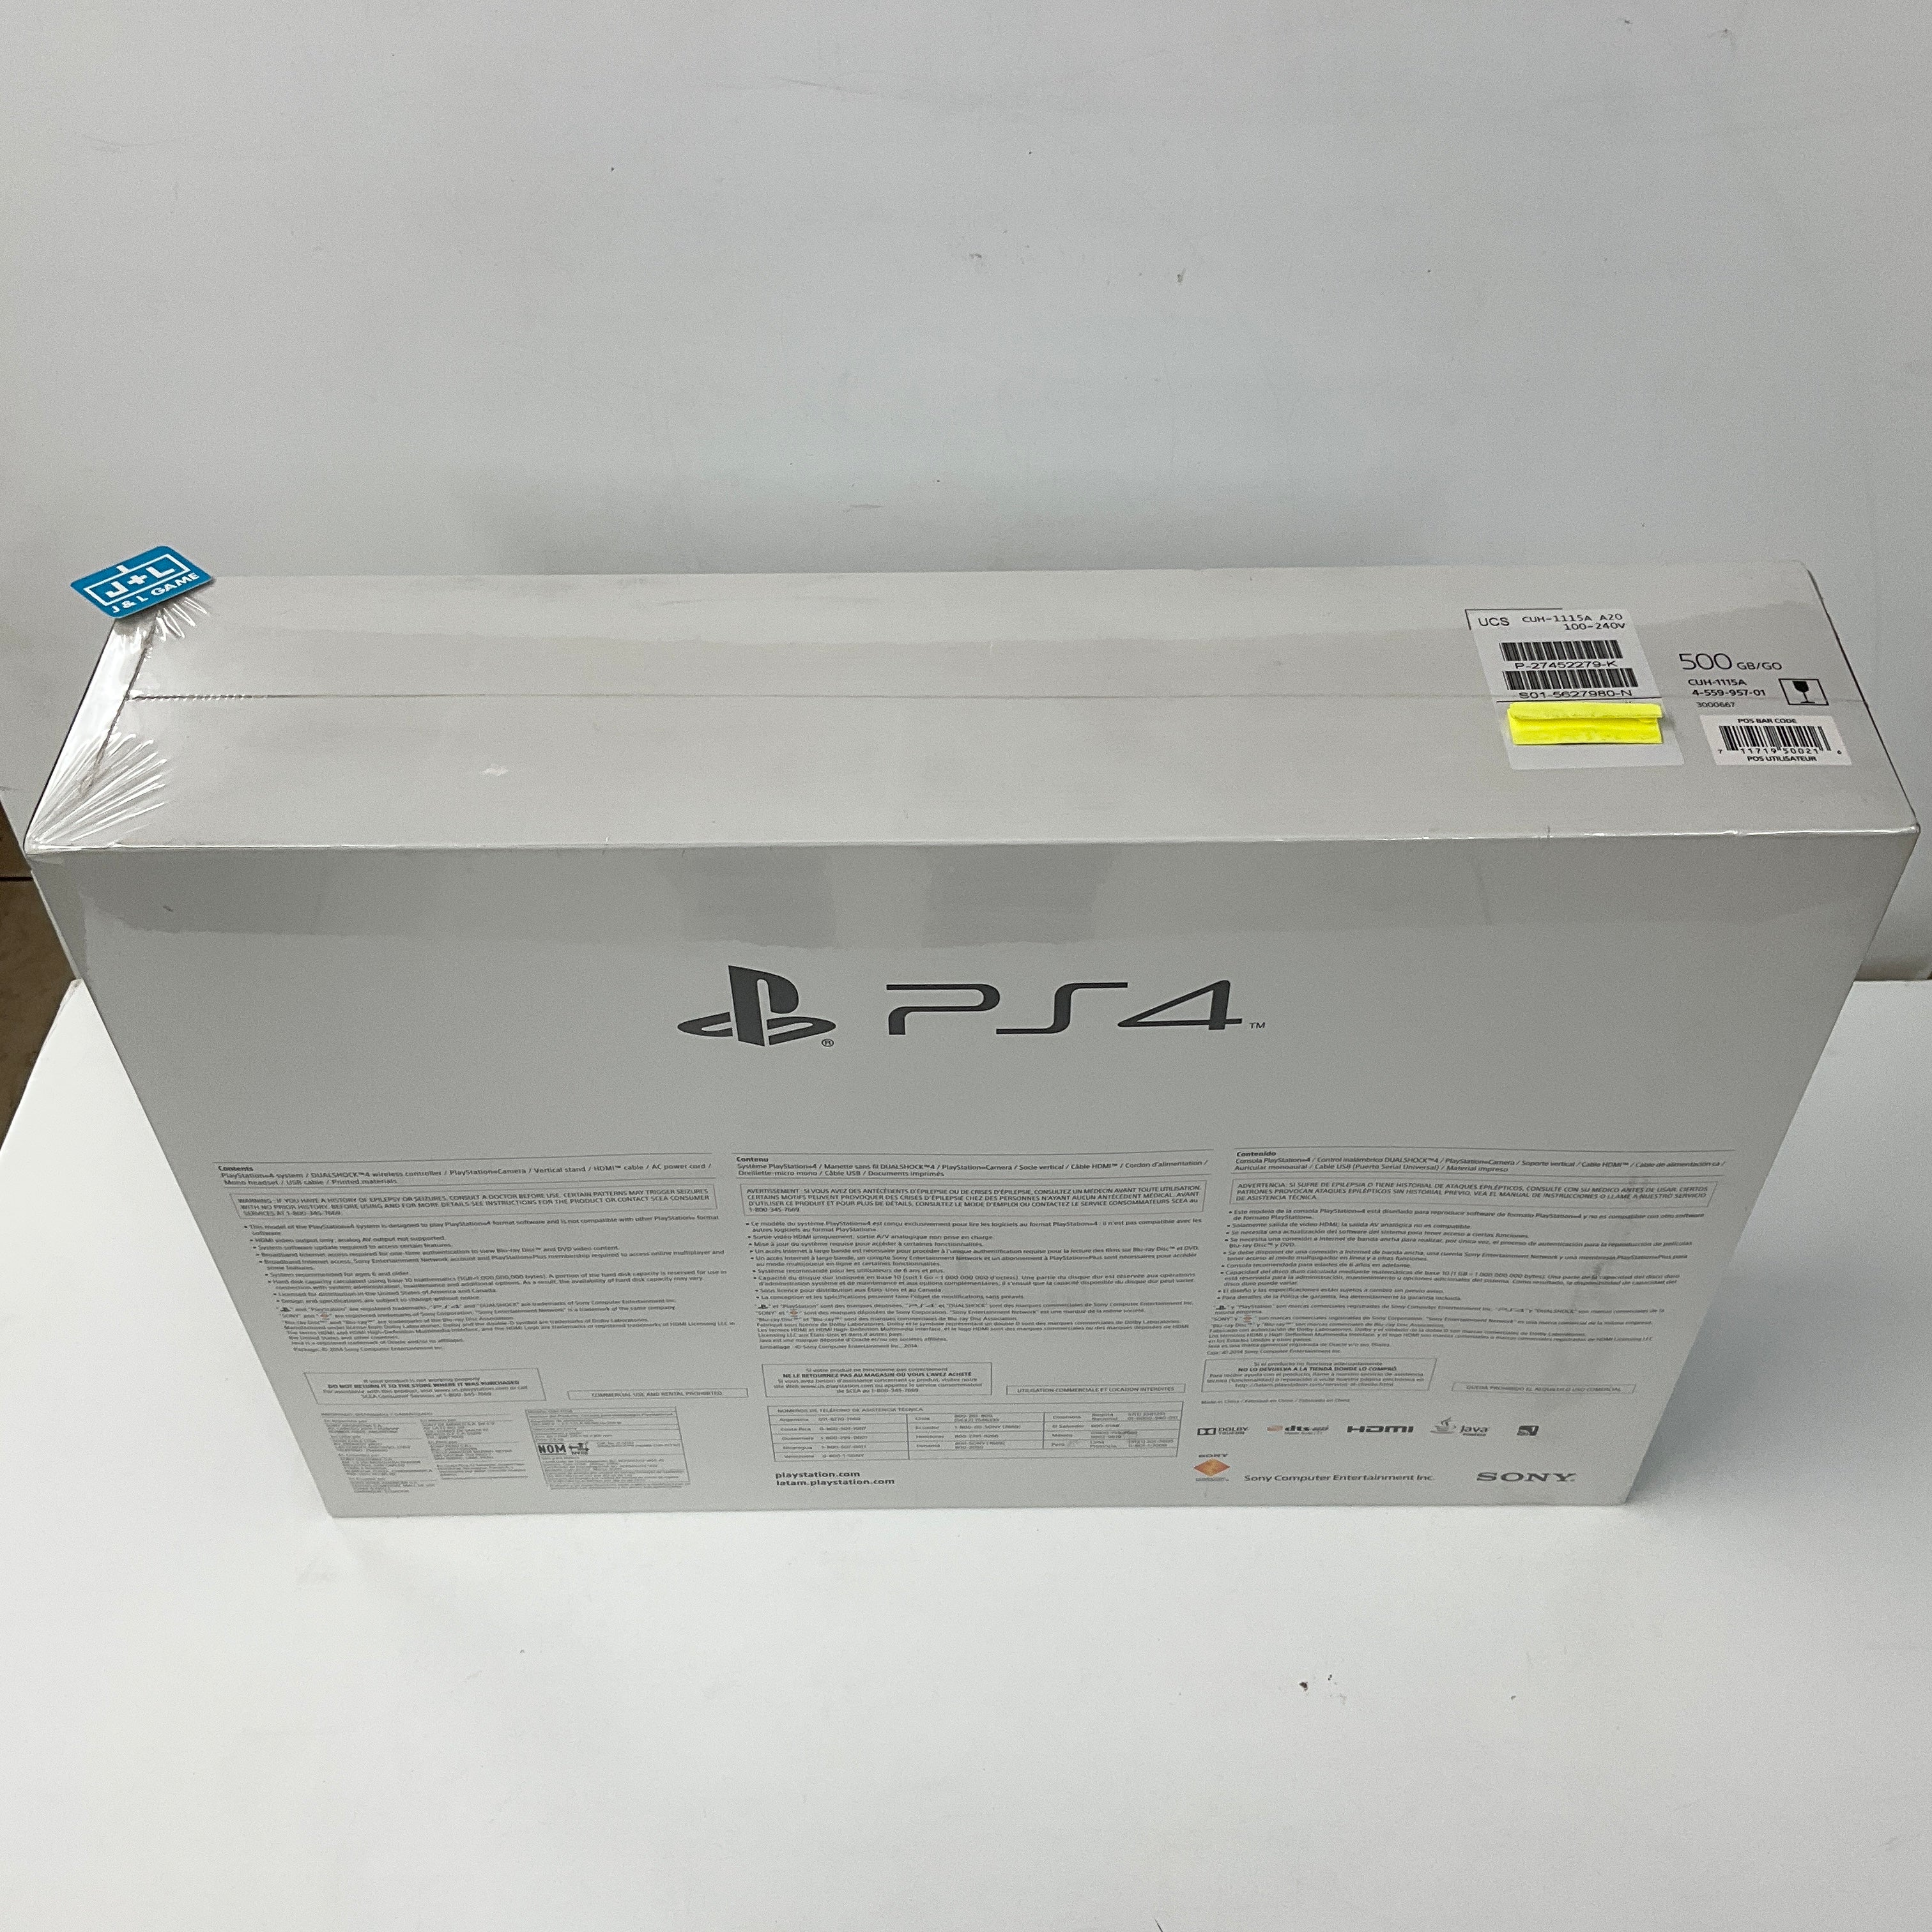 Sony Playstation 4 Console - 20th Anniversary Edition